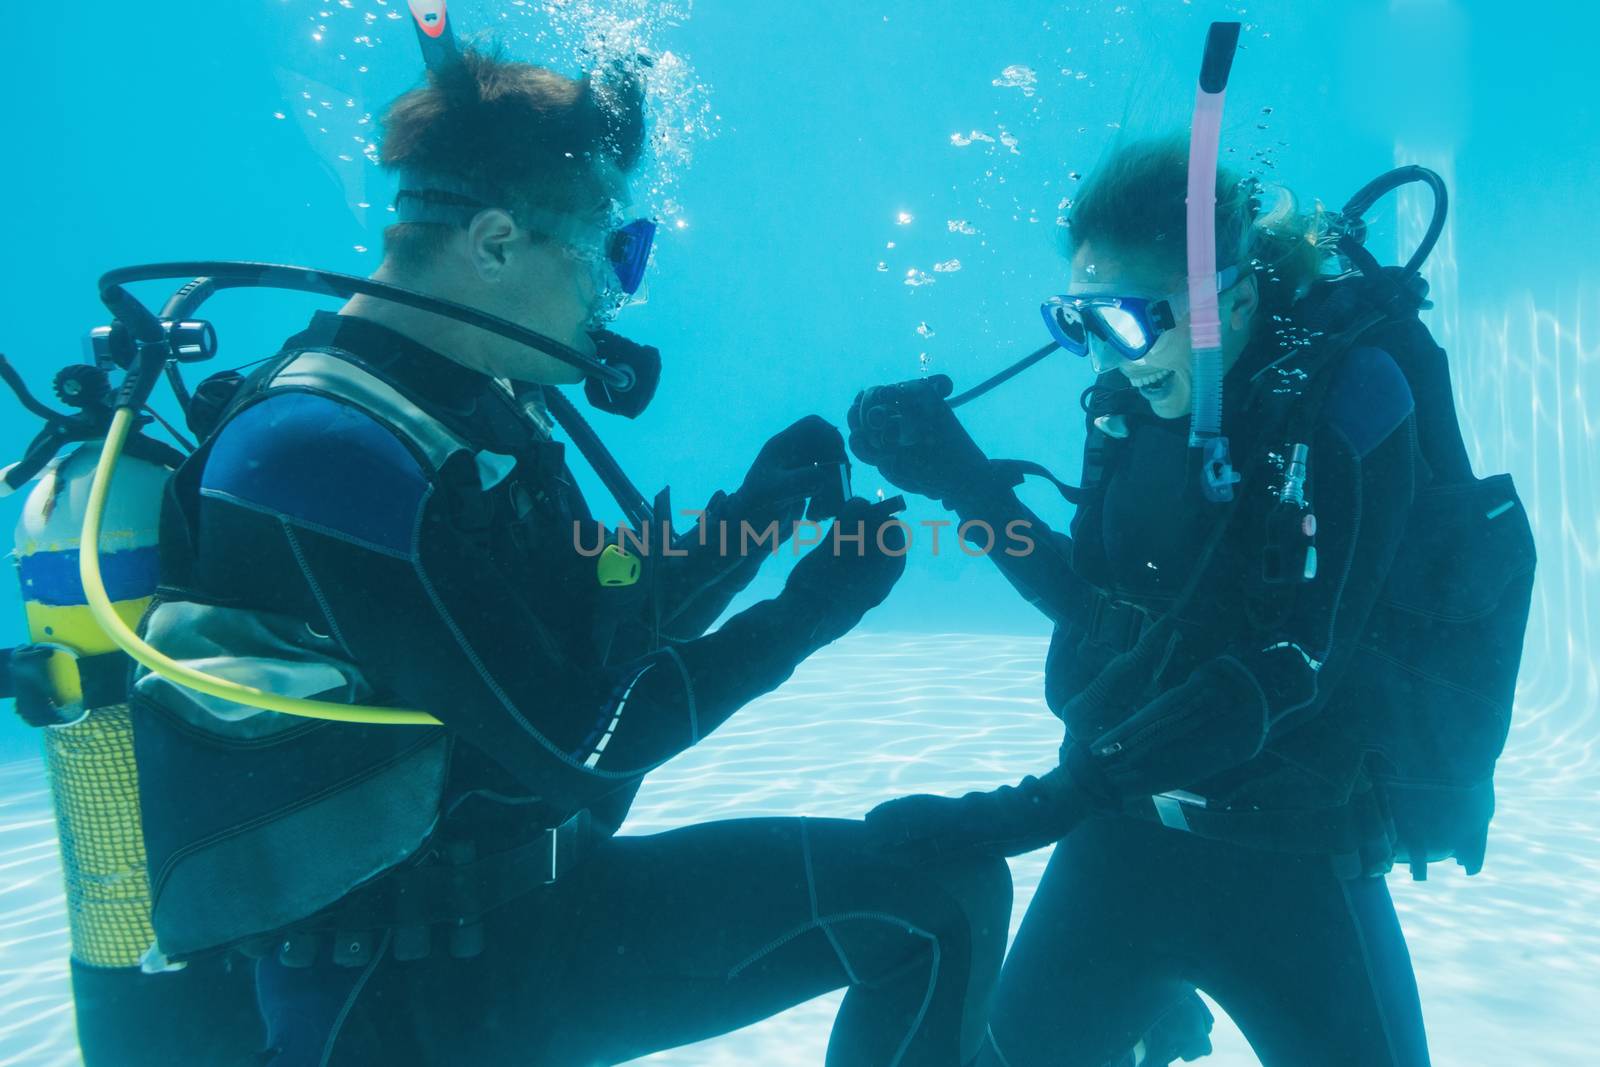 Man proposing marriage to his shocked girlfriend underwater in scuba gear  on their holidays